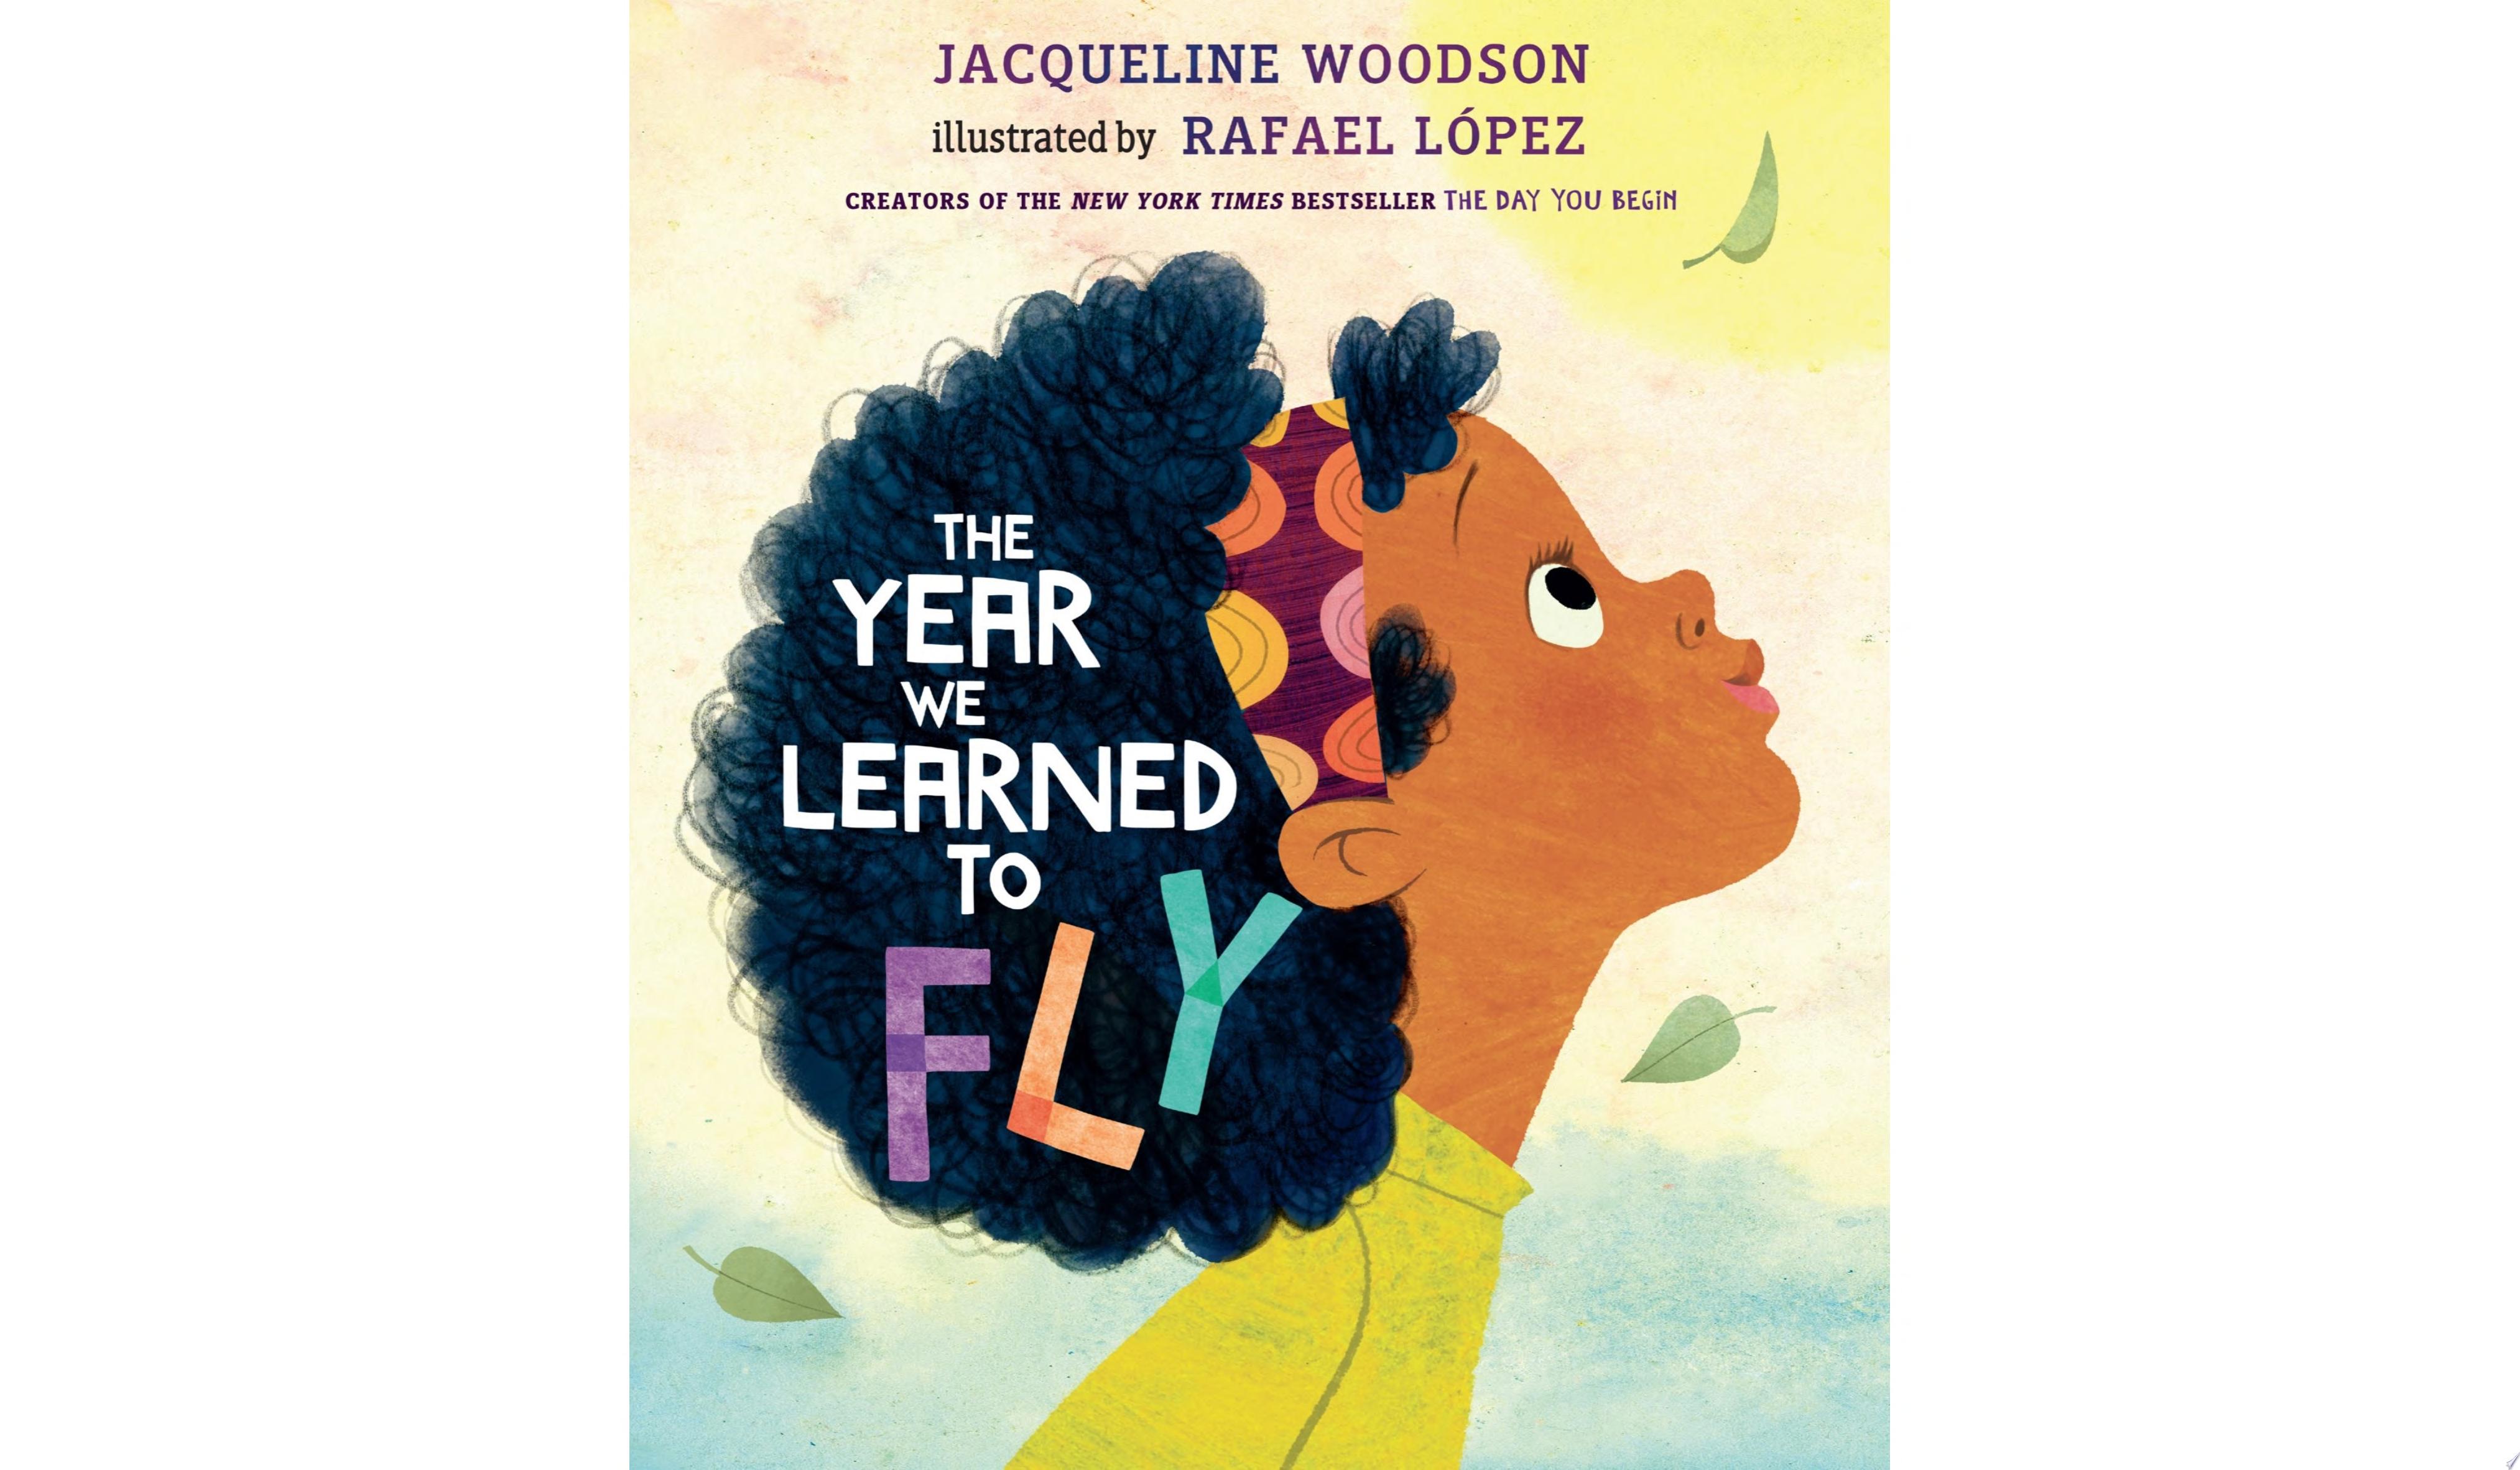 Image for "The Year We Learned to Fly"